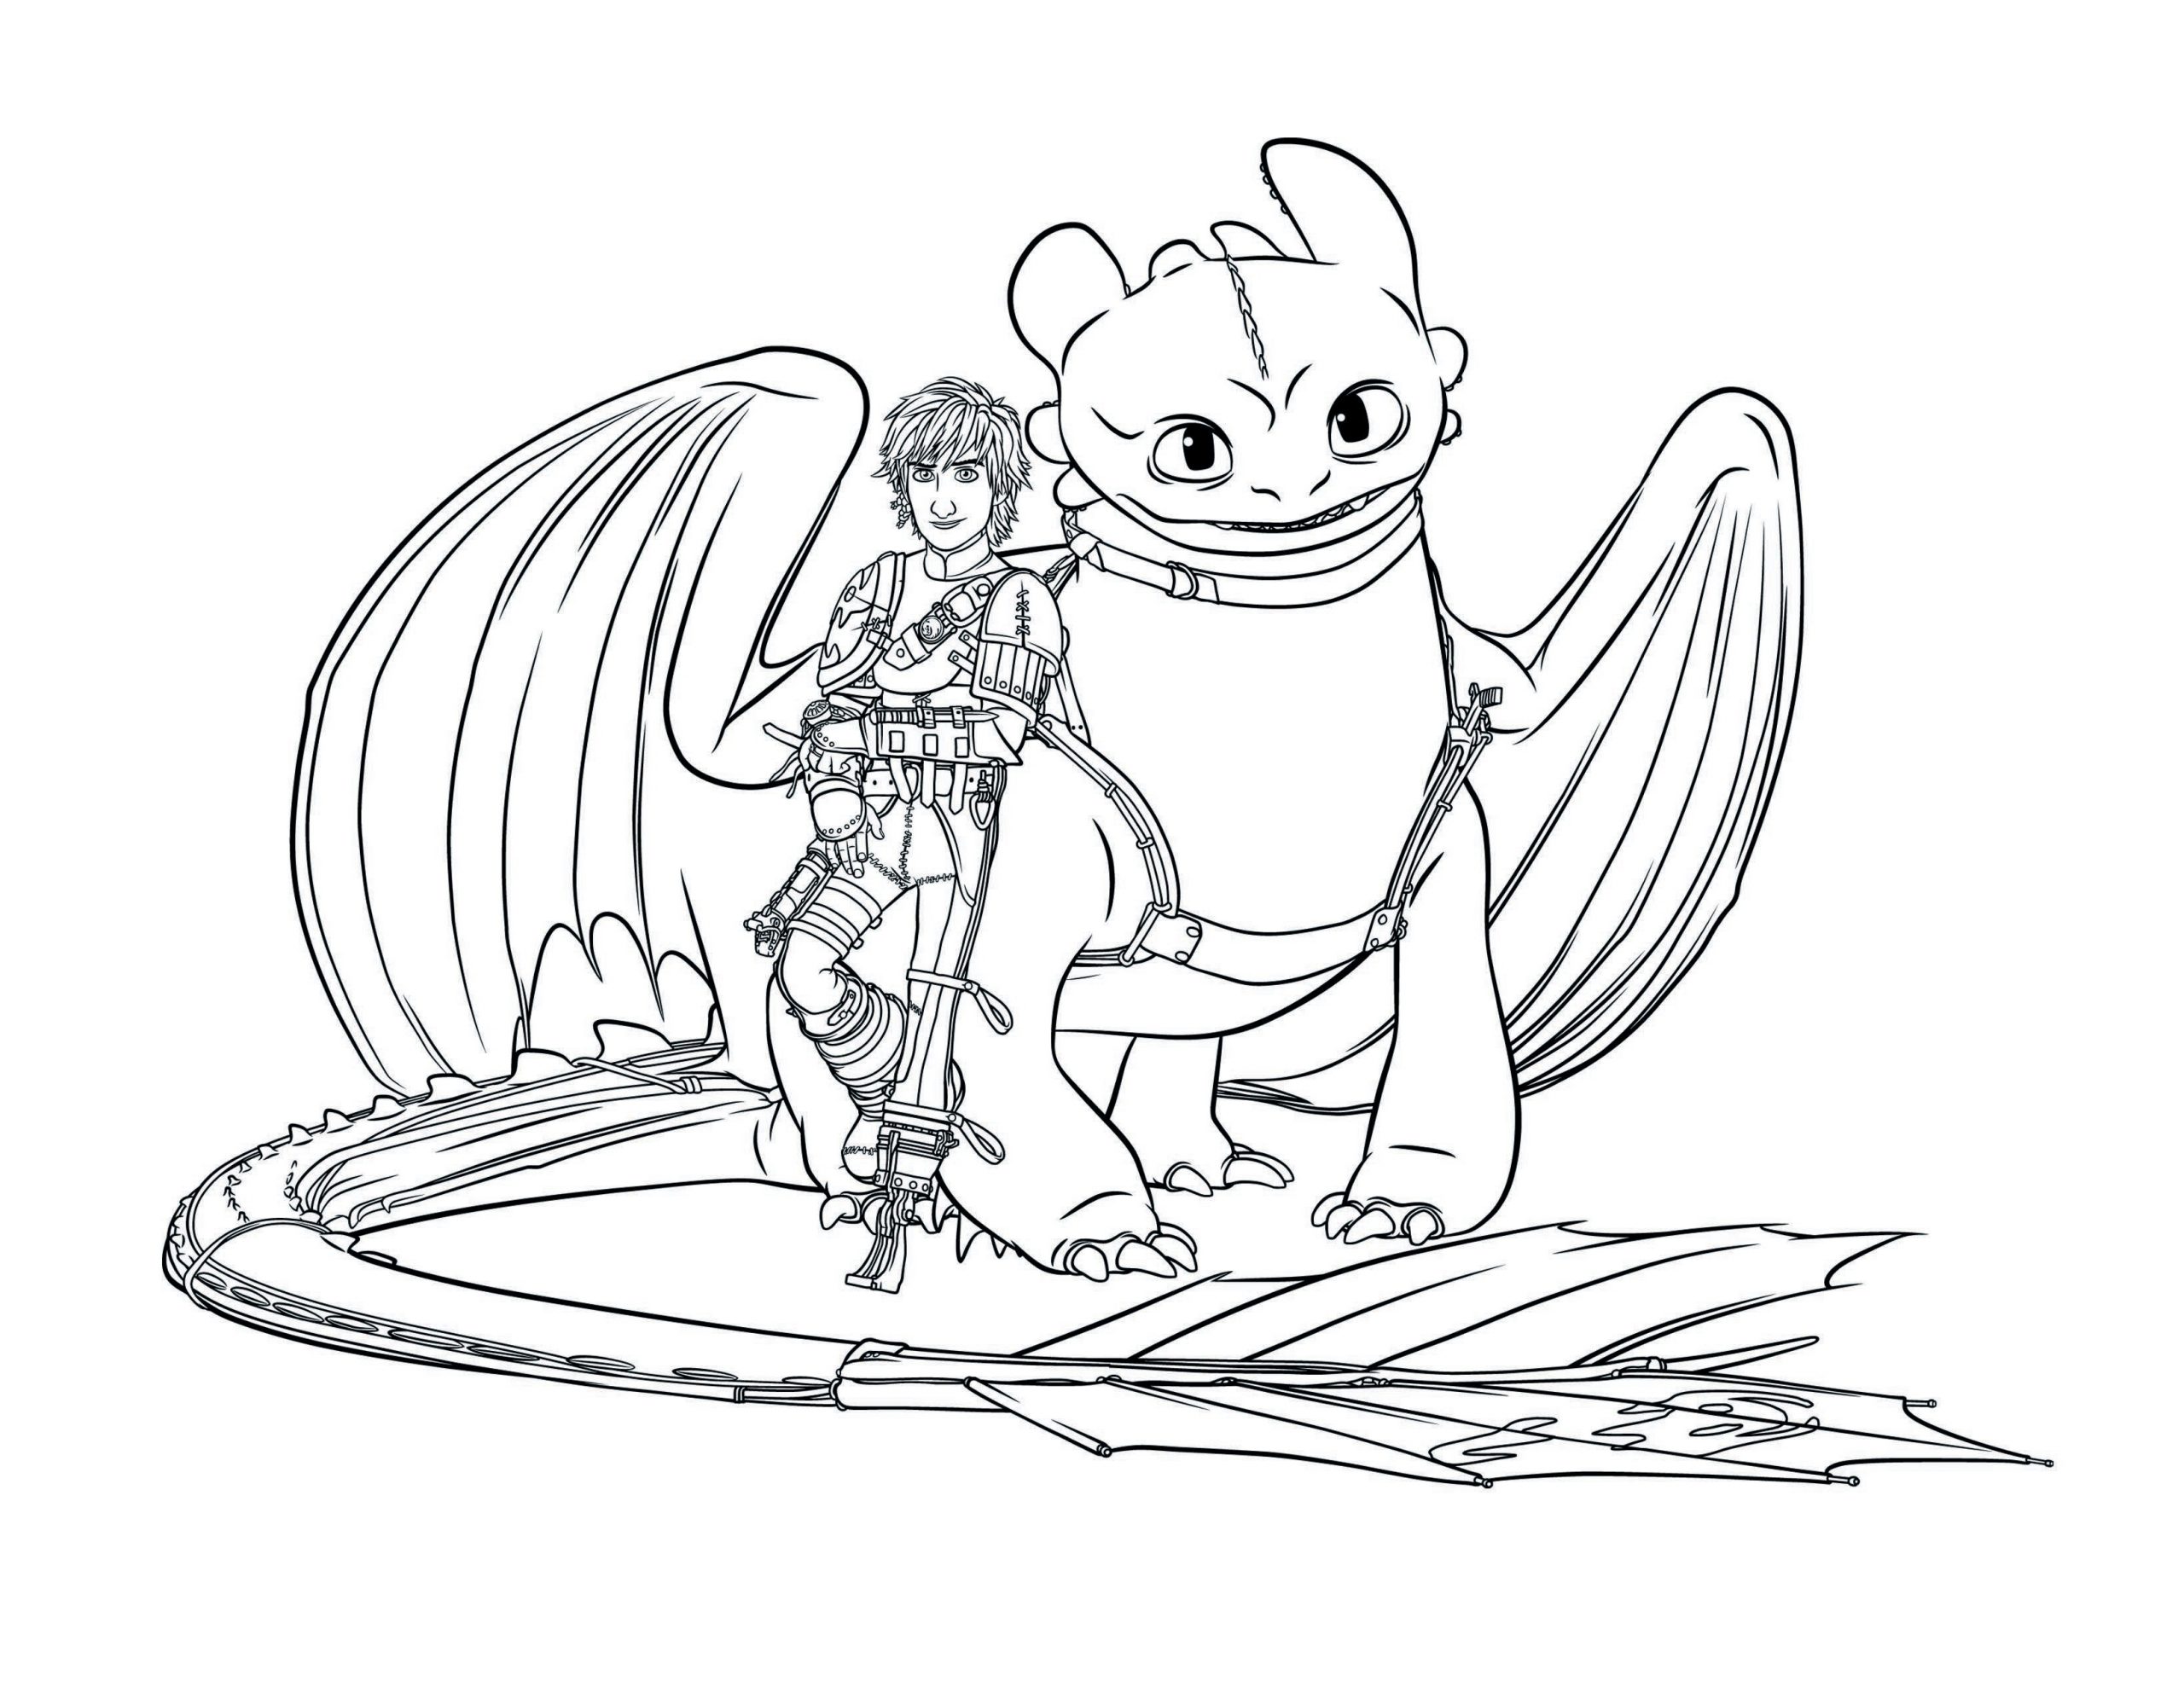 Toothless coloring page download